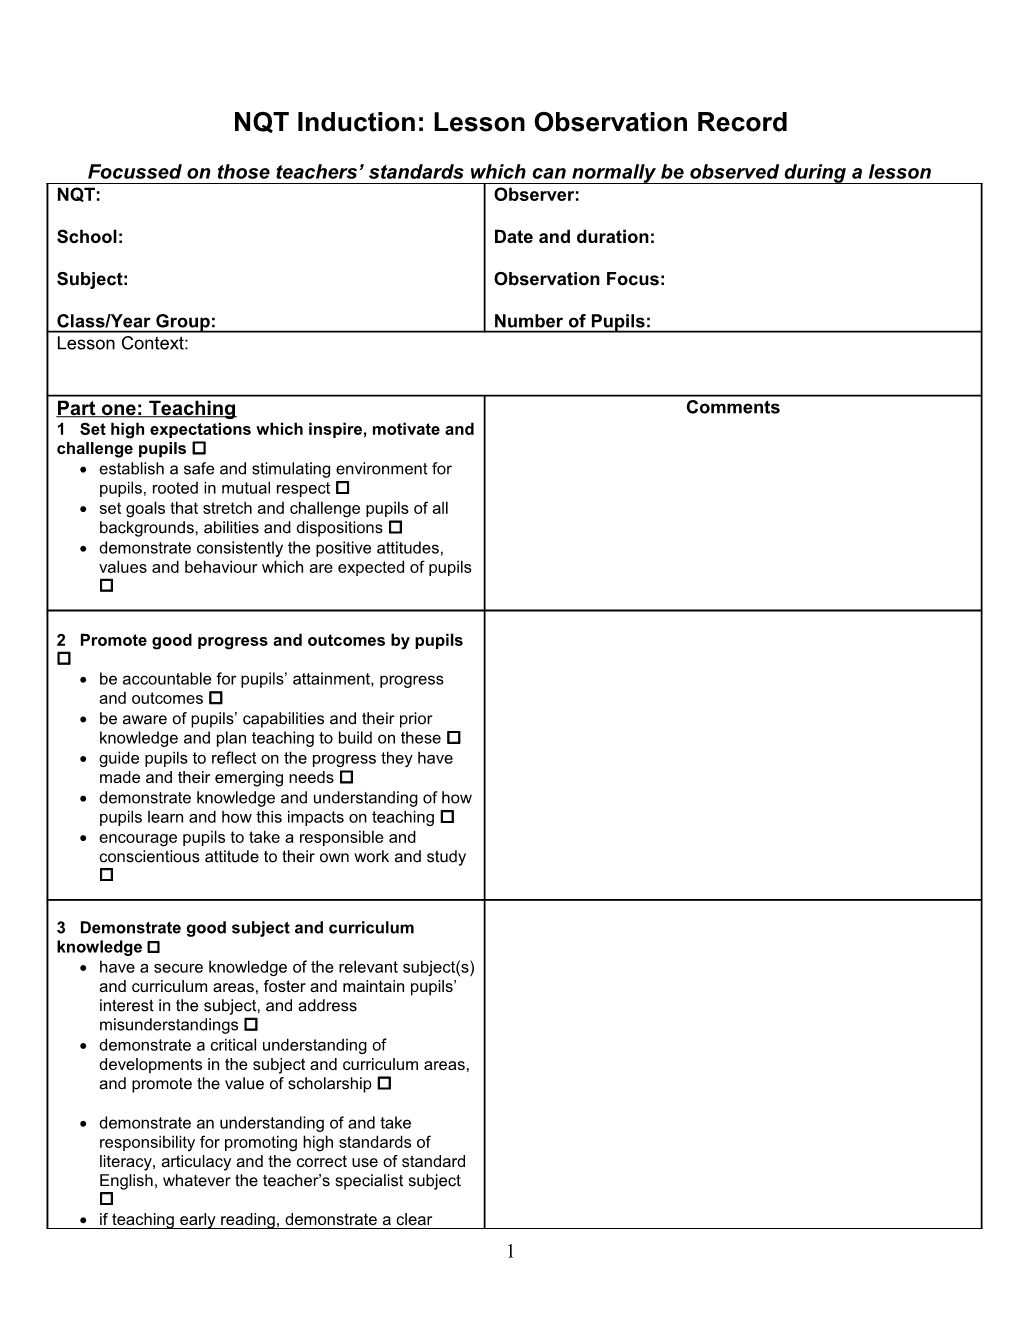 Induction Lesson Observation Form - Primary